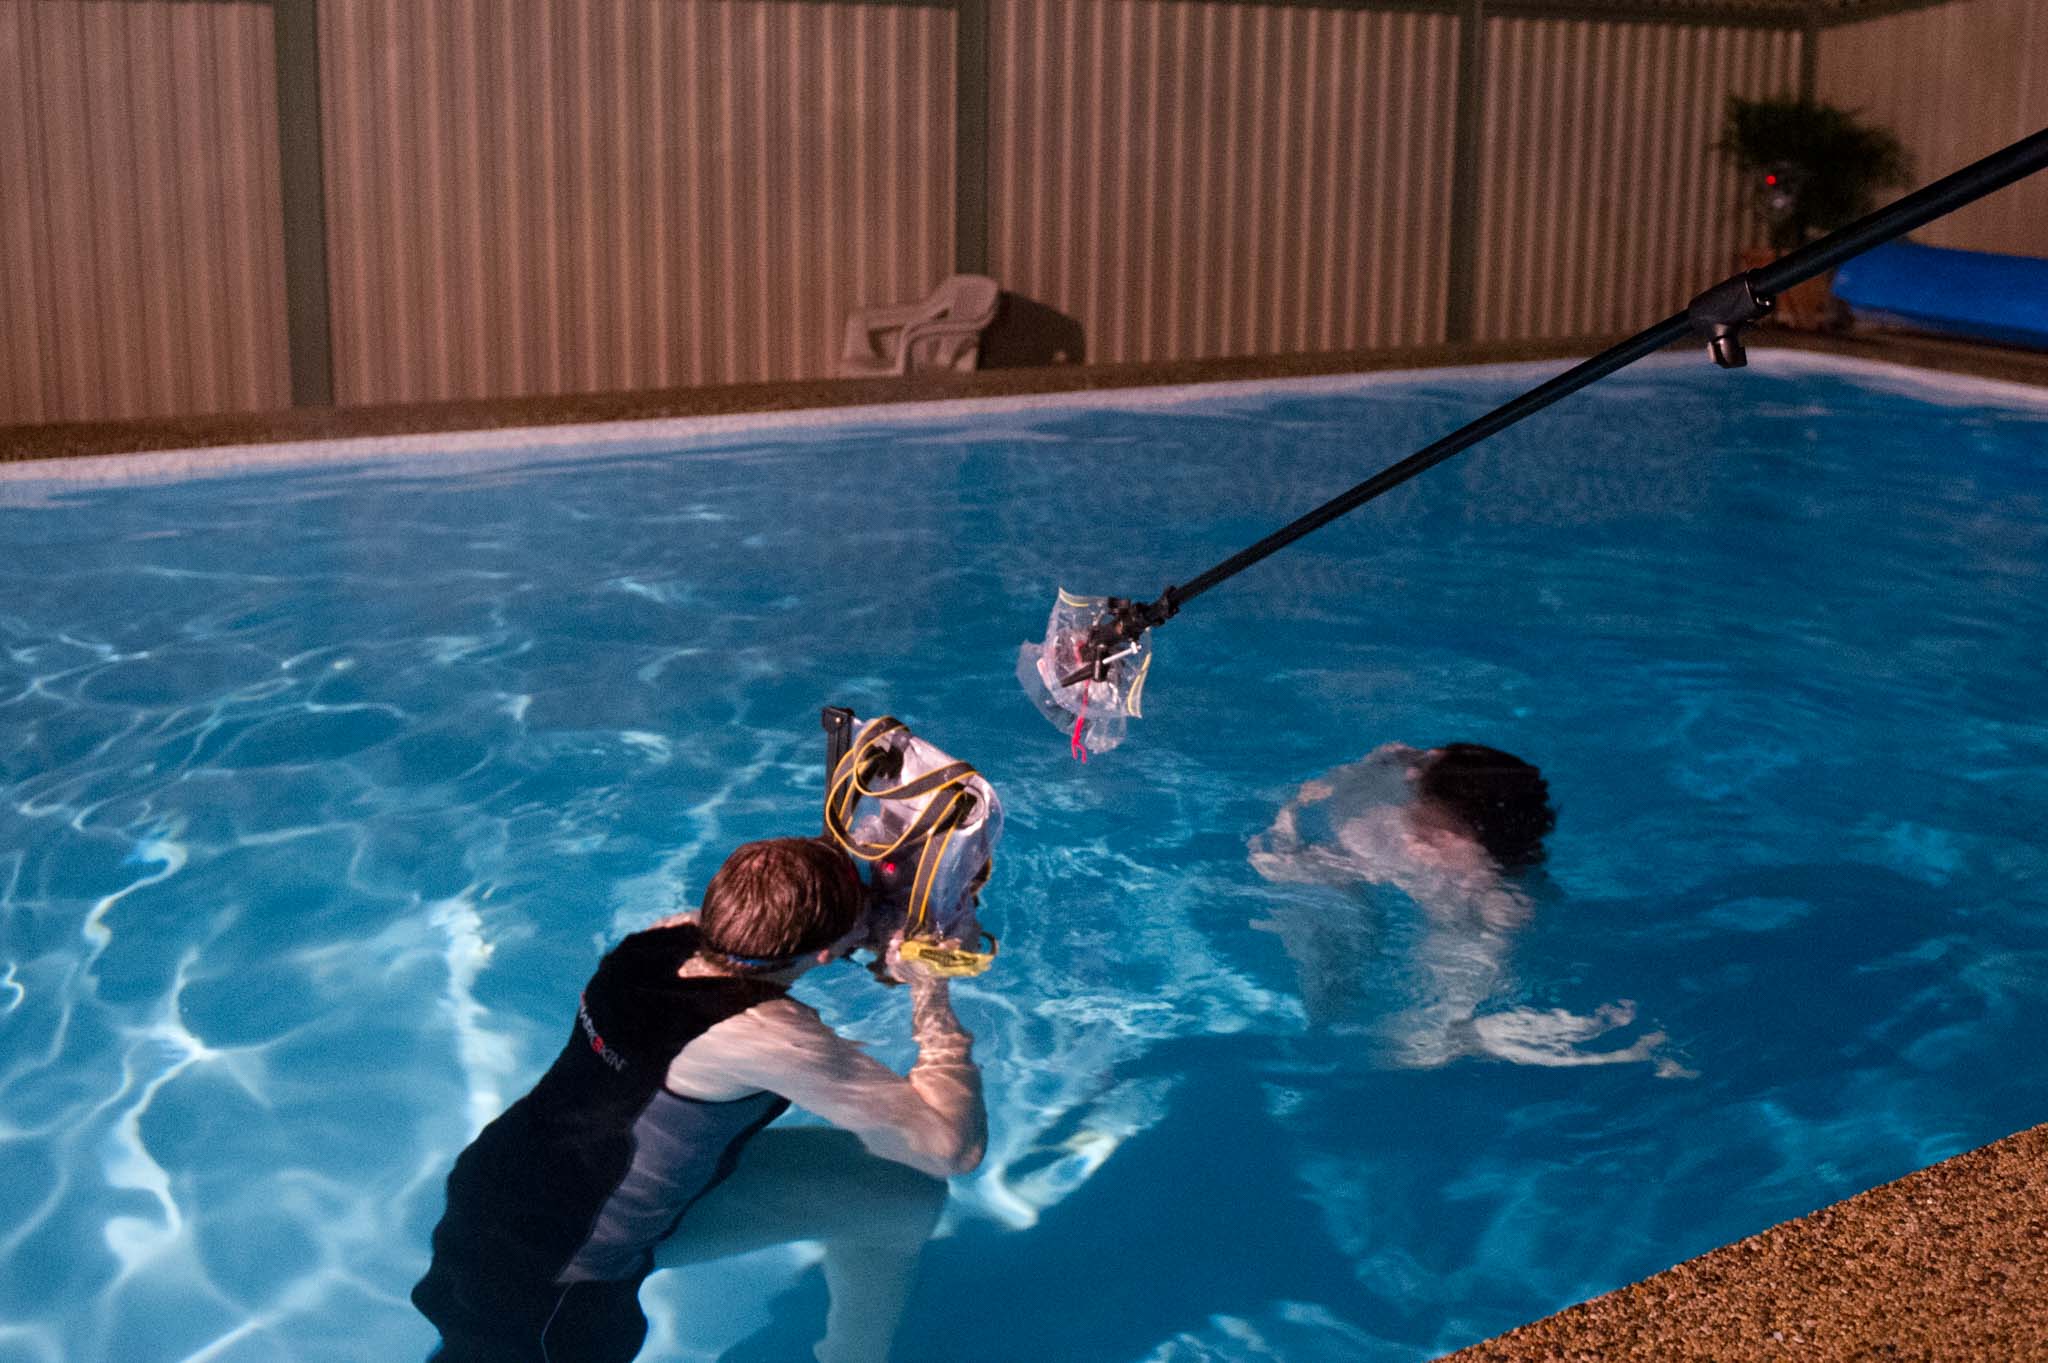 Behind the scenes of an underwater photo session